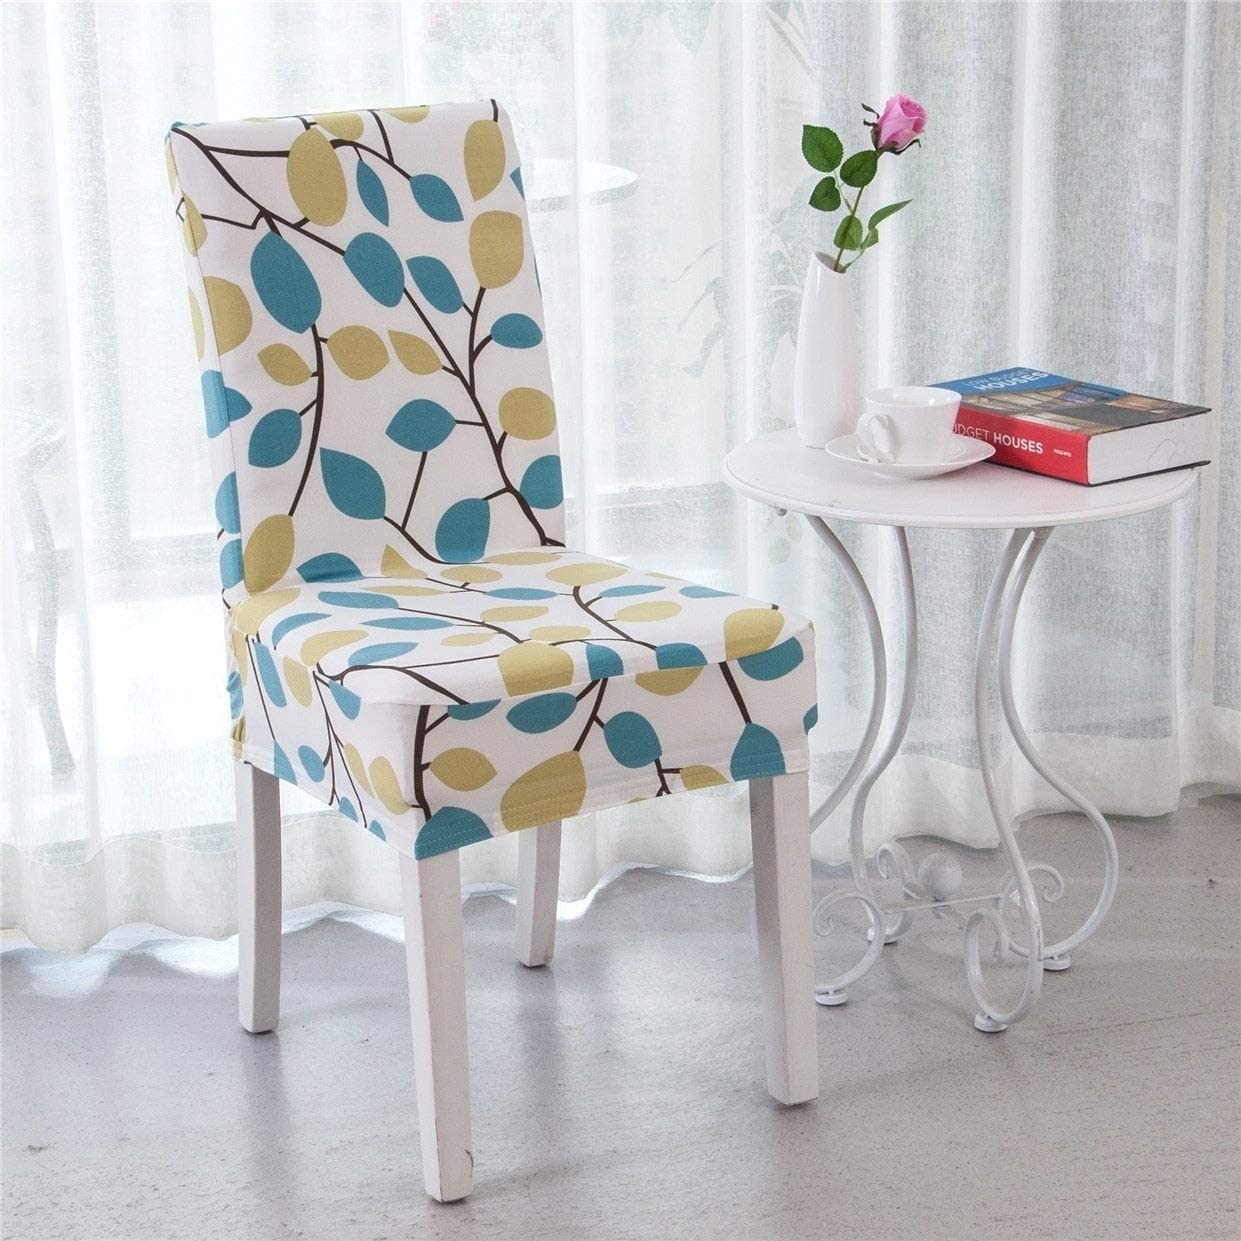 MISC Elegant Polyester Spandex Stretch Dining Chair Slipcover Green Nature Country Handmade